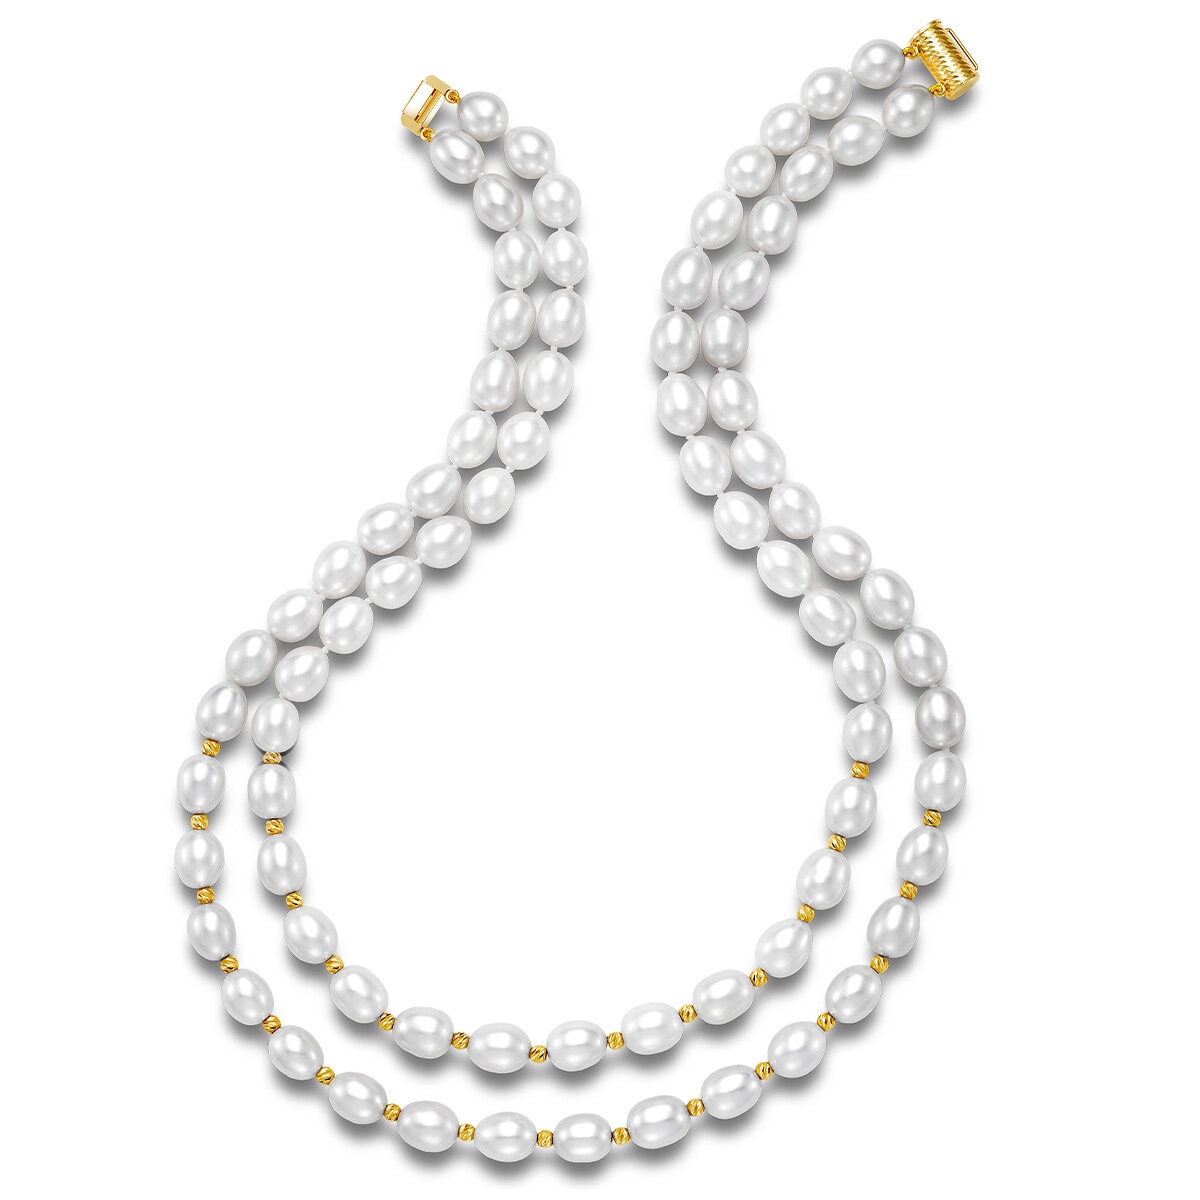 14KT Yellow Gold Two-Row 8-9mm Oval Freshwater Pearl Diamond Cut Bead Necklace